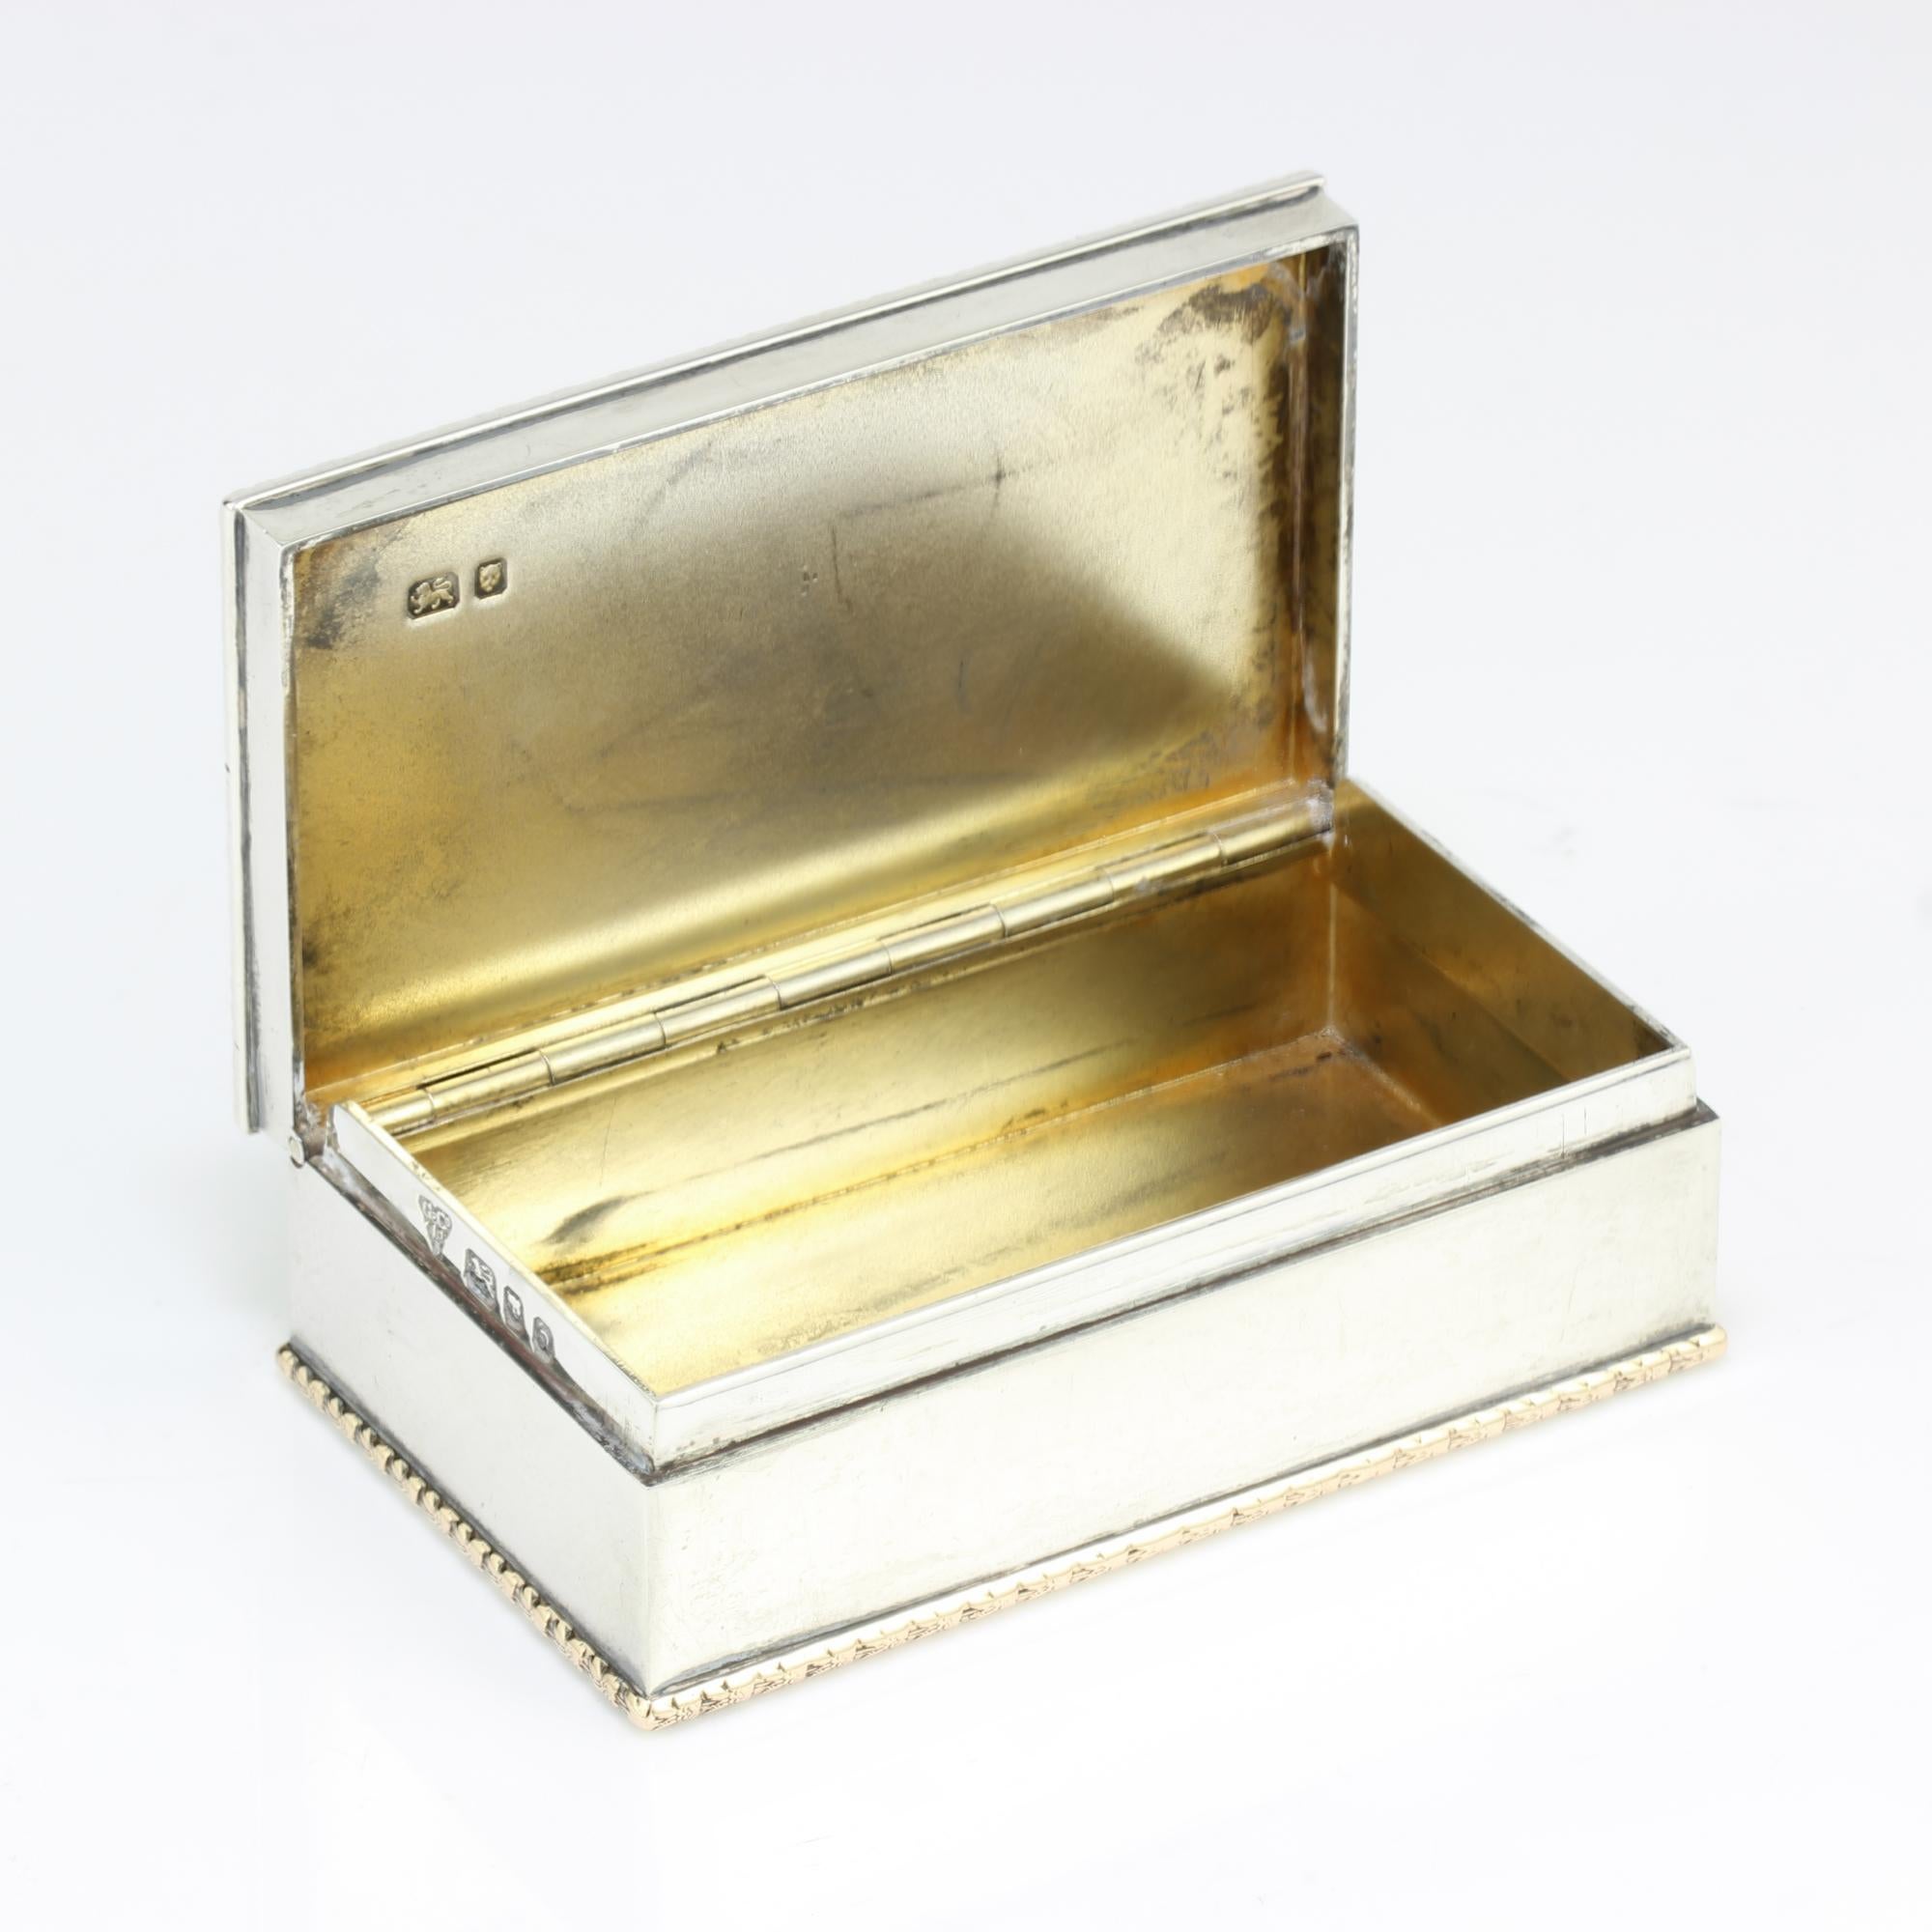 Antique sterling silver and gold snuff / tobbaco / pill box by Garrard & Co Ltd
Made in London 1956
Maker: Garrard & Co Ltd
Fully hallmarked.

Dimensions -
Length x width x height: 8.3 x 4.8 x 2.6 cm
Weight:205 grams

Condition: Minor wear